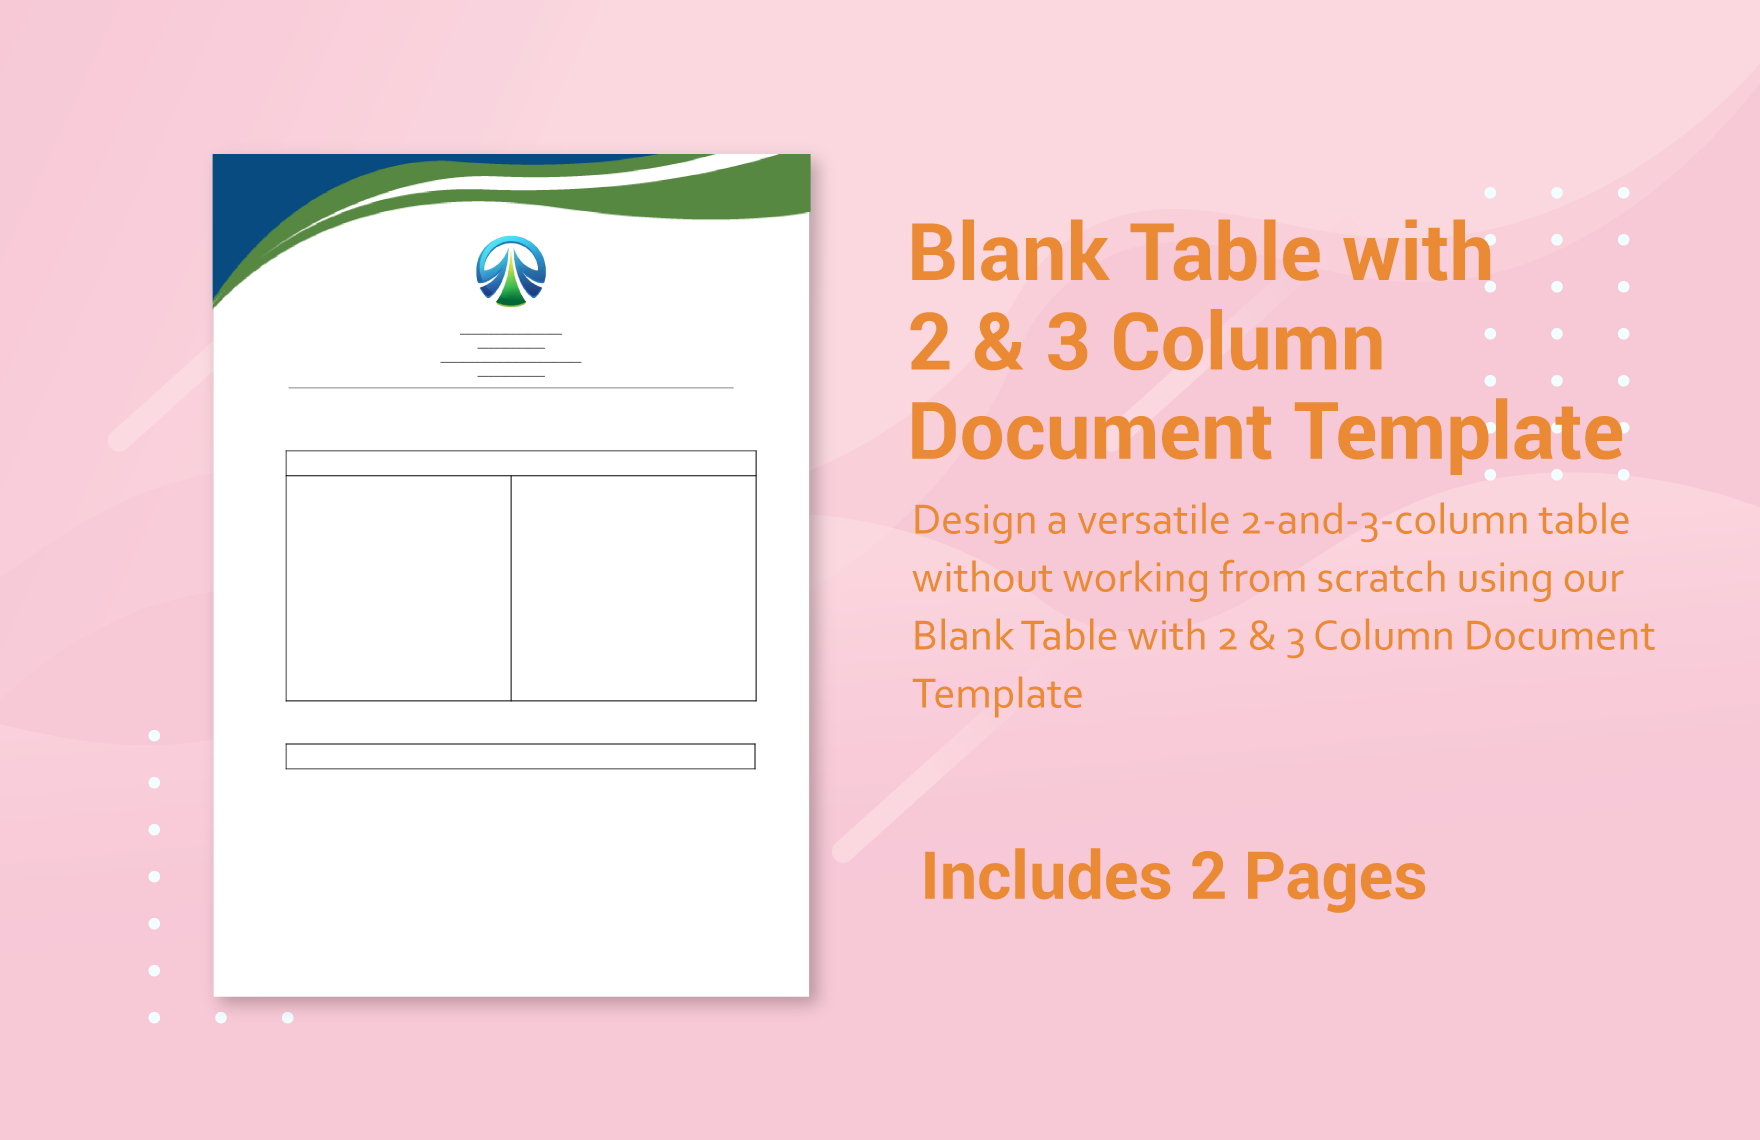 Blank Table with 2 & 3 Column Document Template in Word, Google Docs, PDF